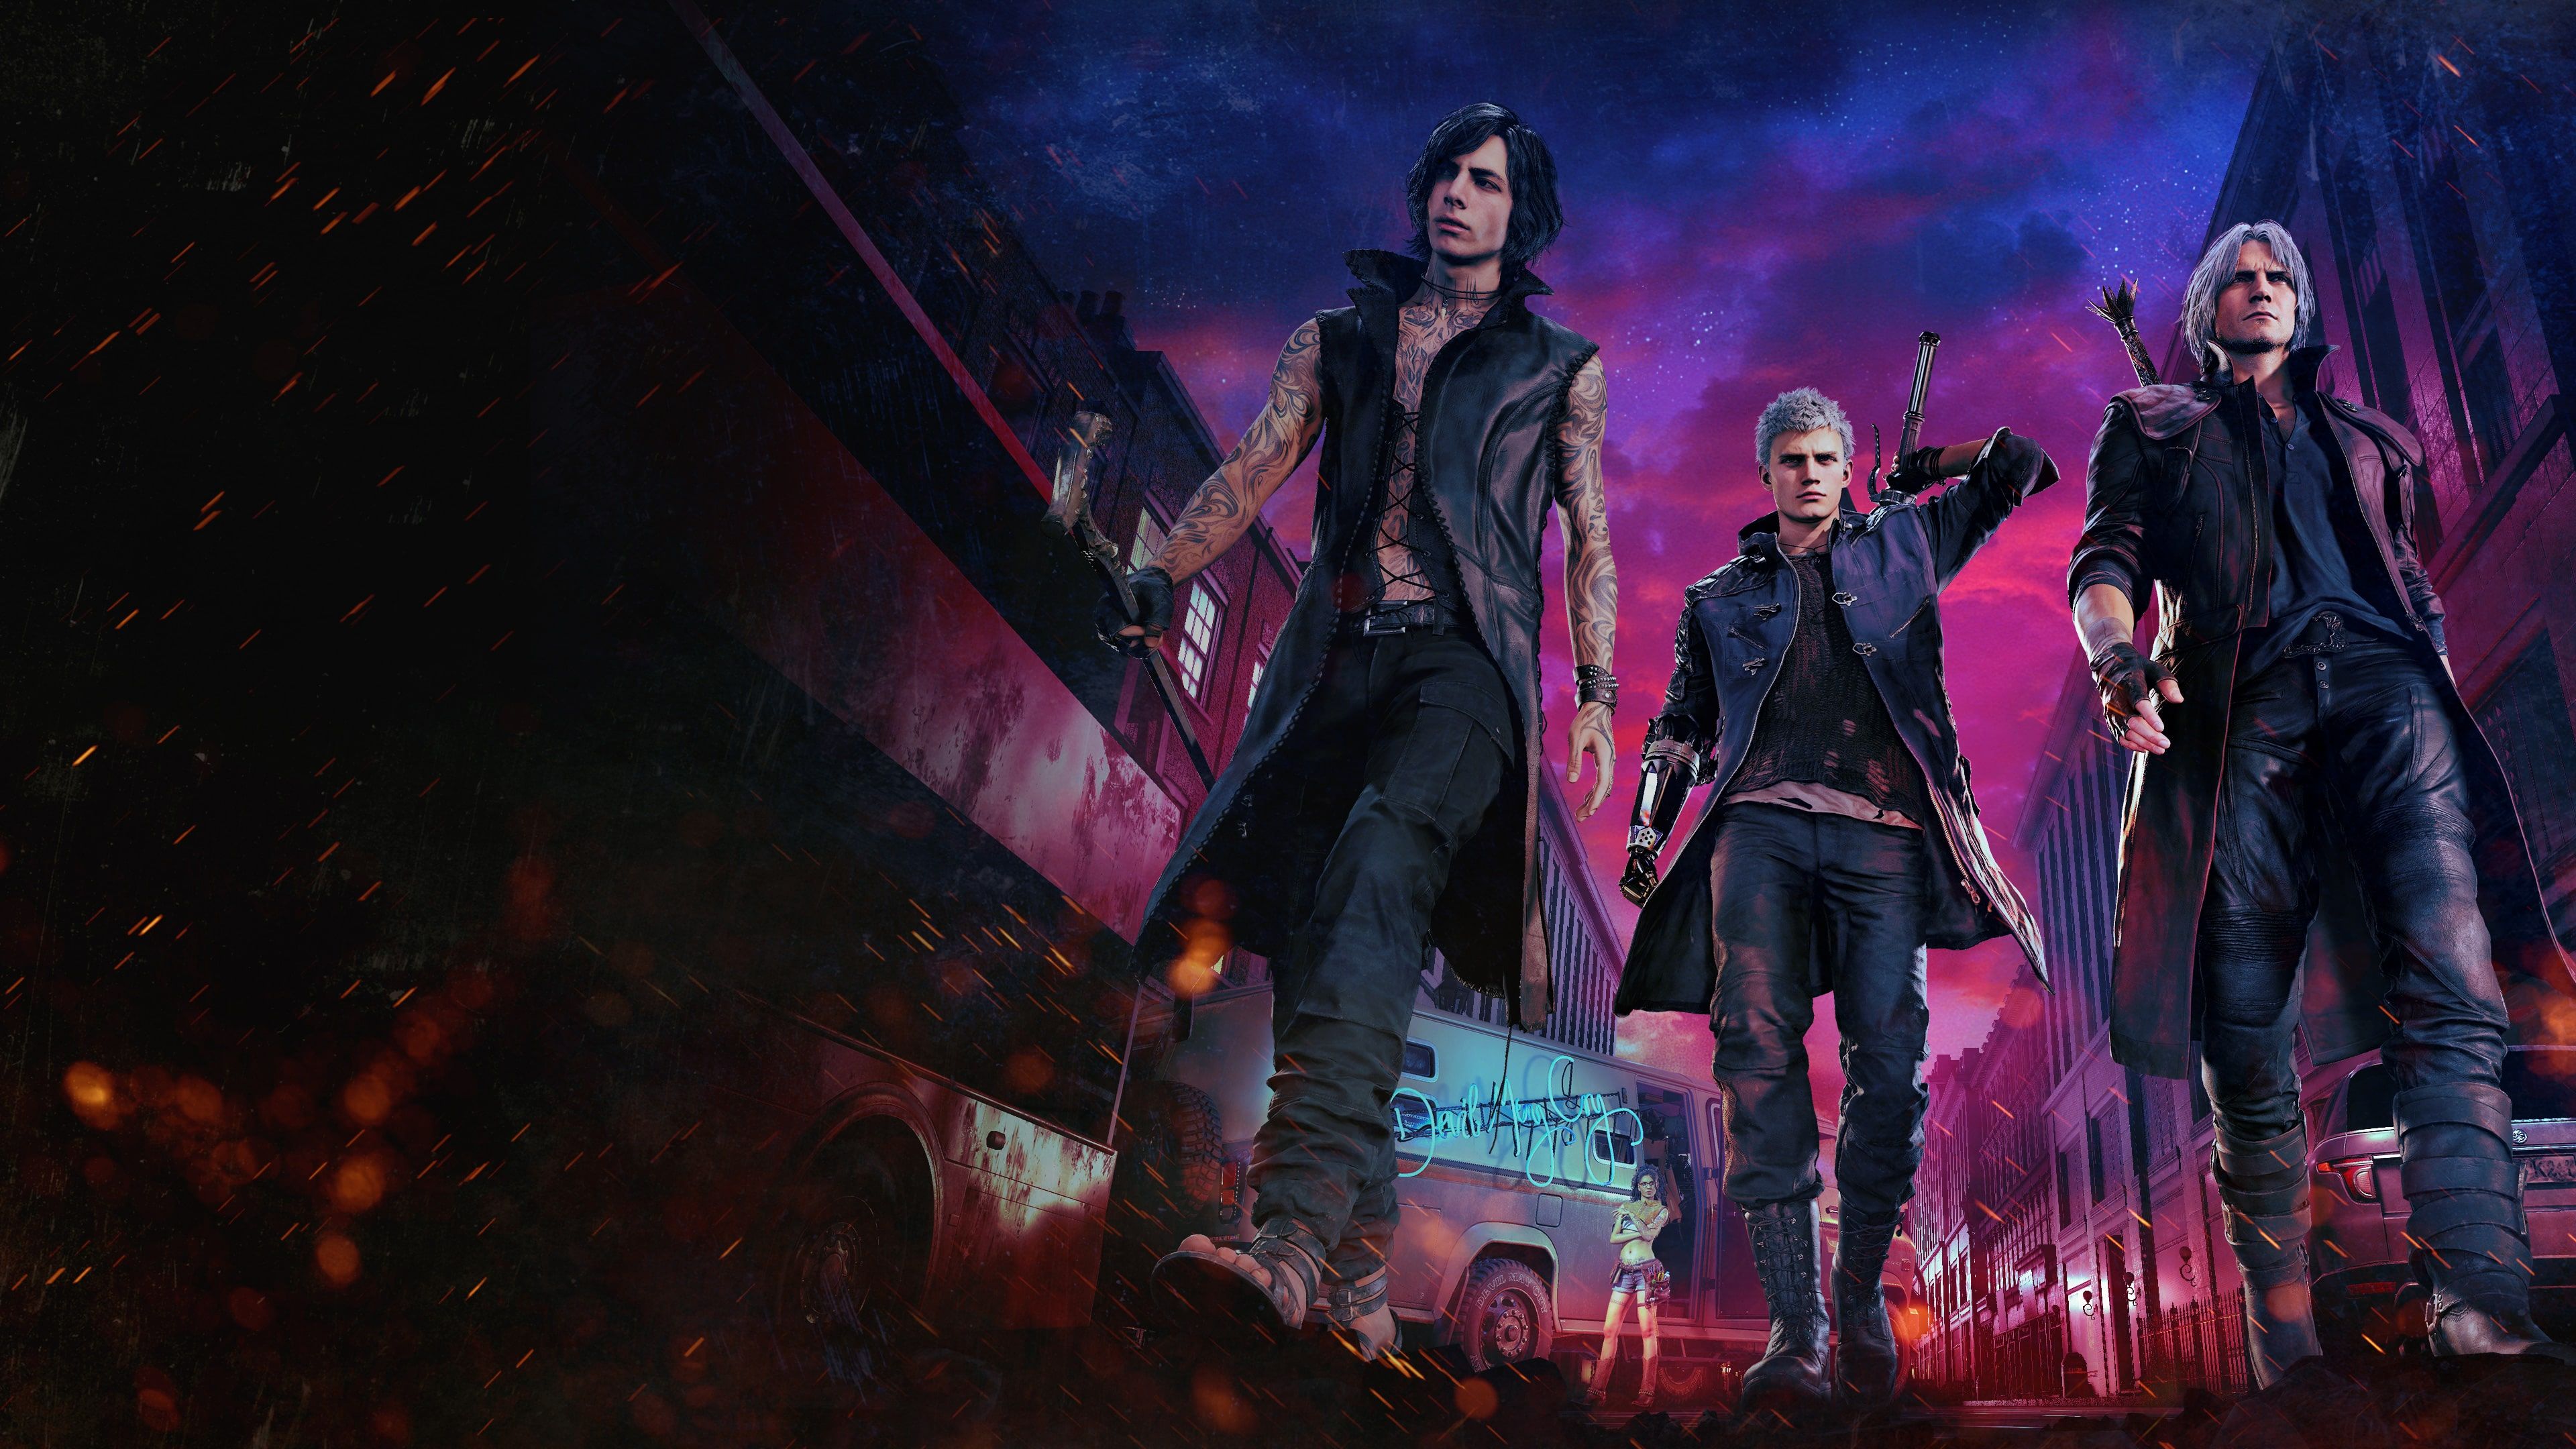 Devil May Cry 5 cover image